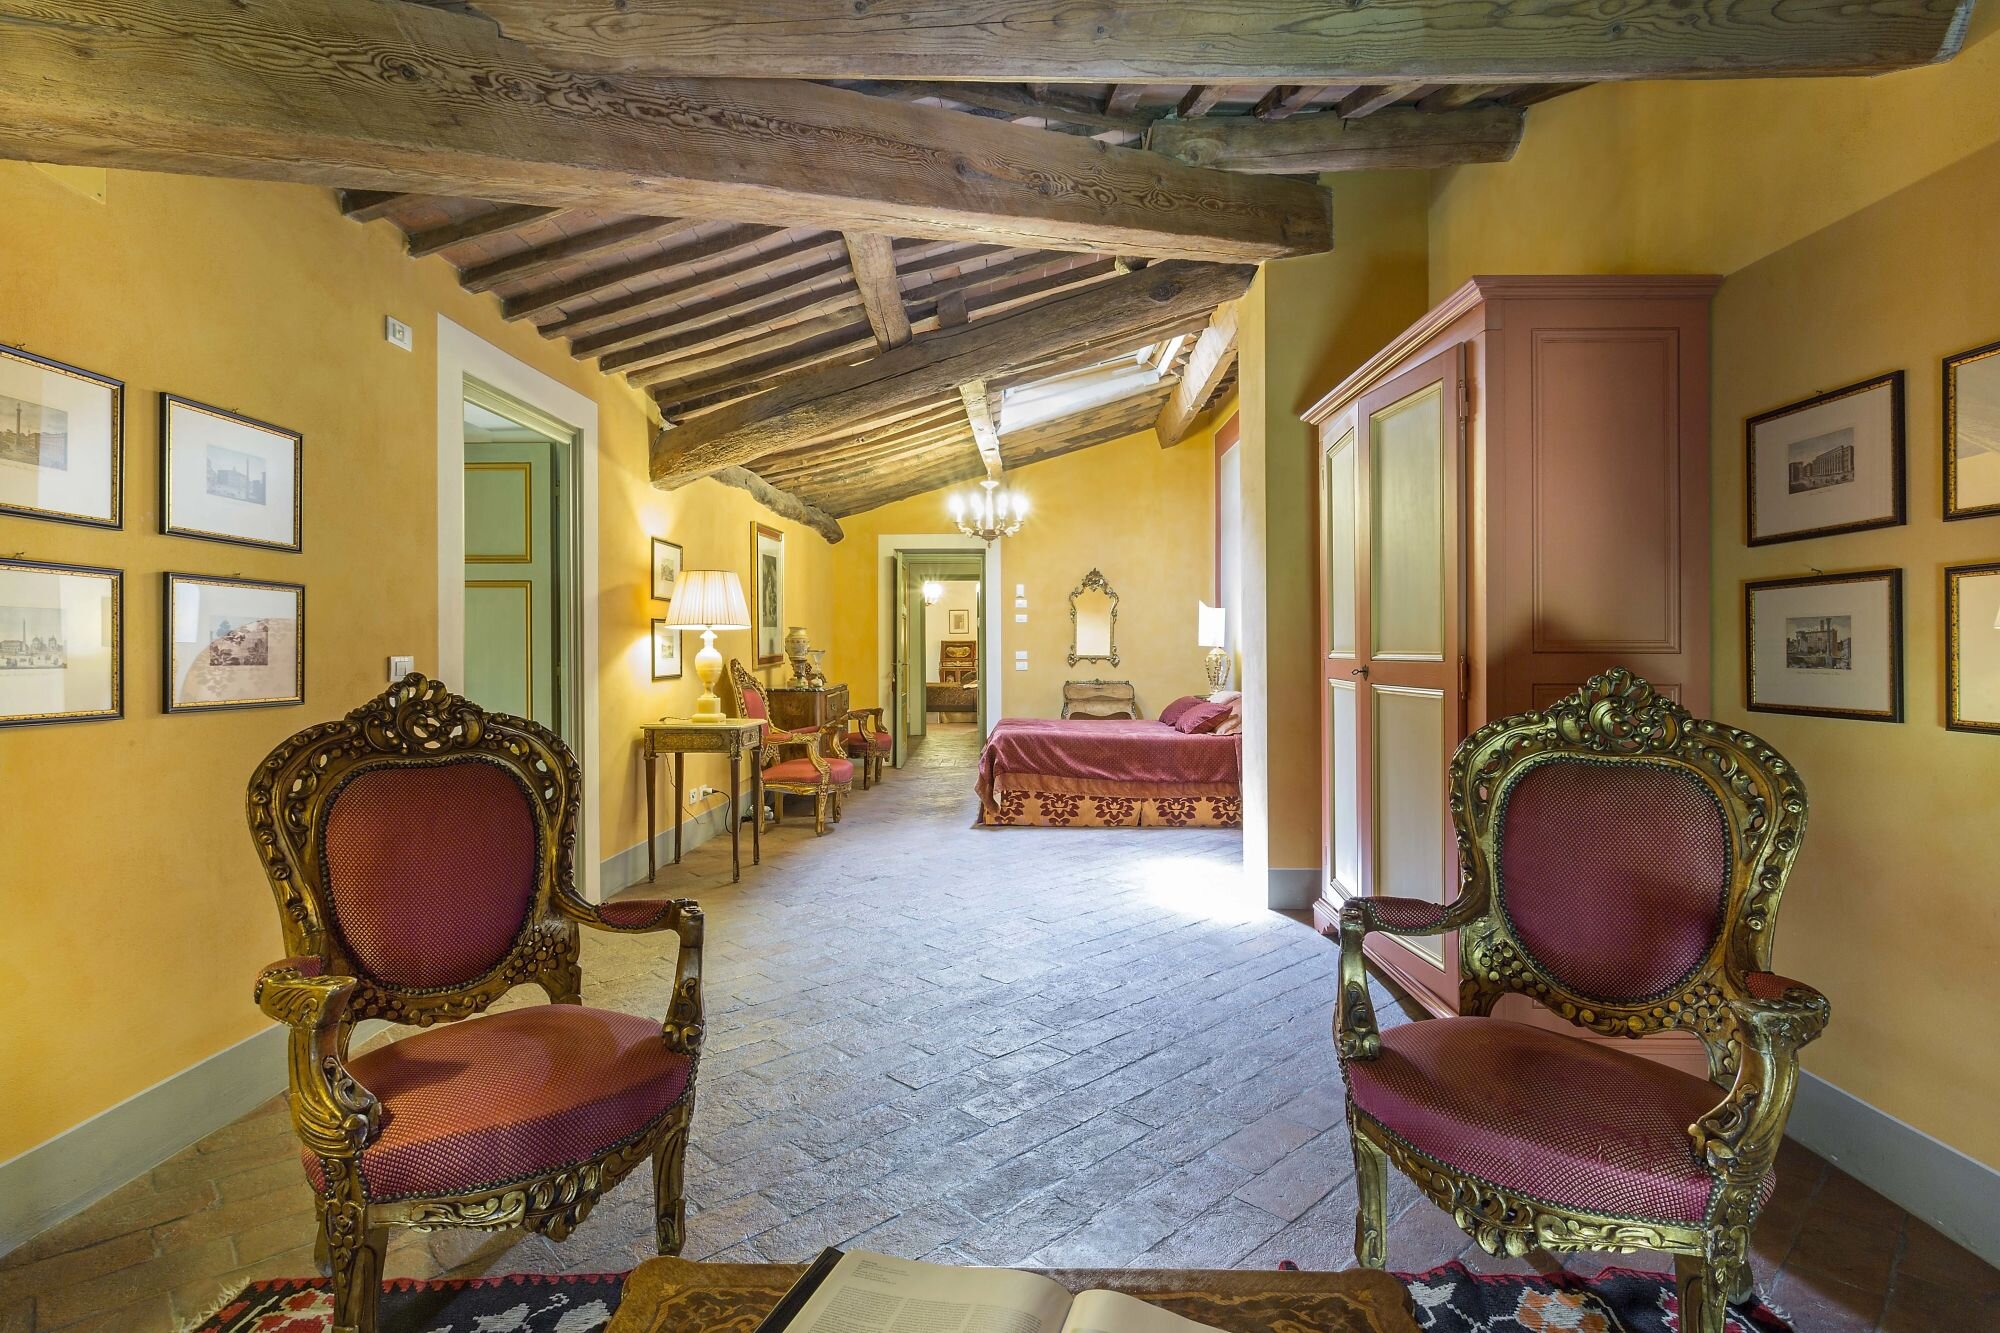 Francis York A Portfolio of Luxury Tuscan Villa Rentals is Coming to Auction31.jpeg